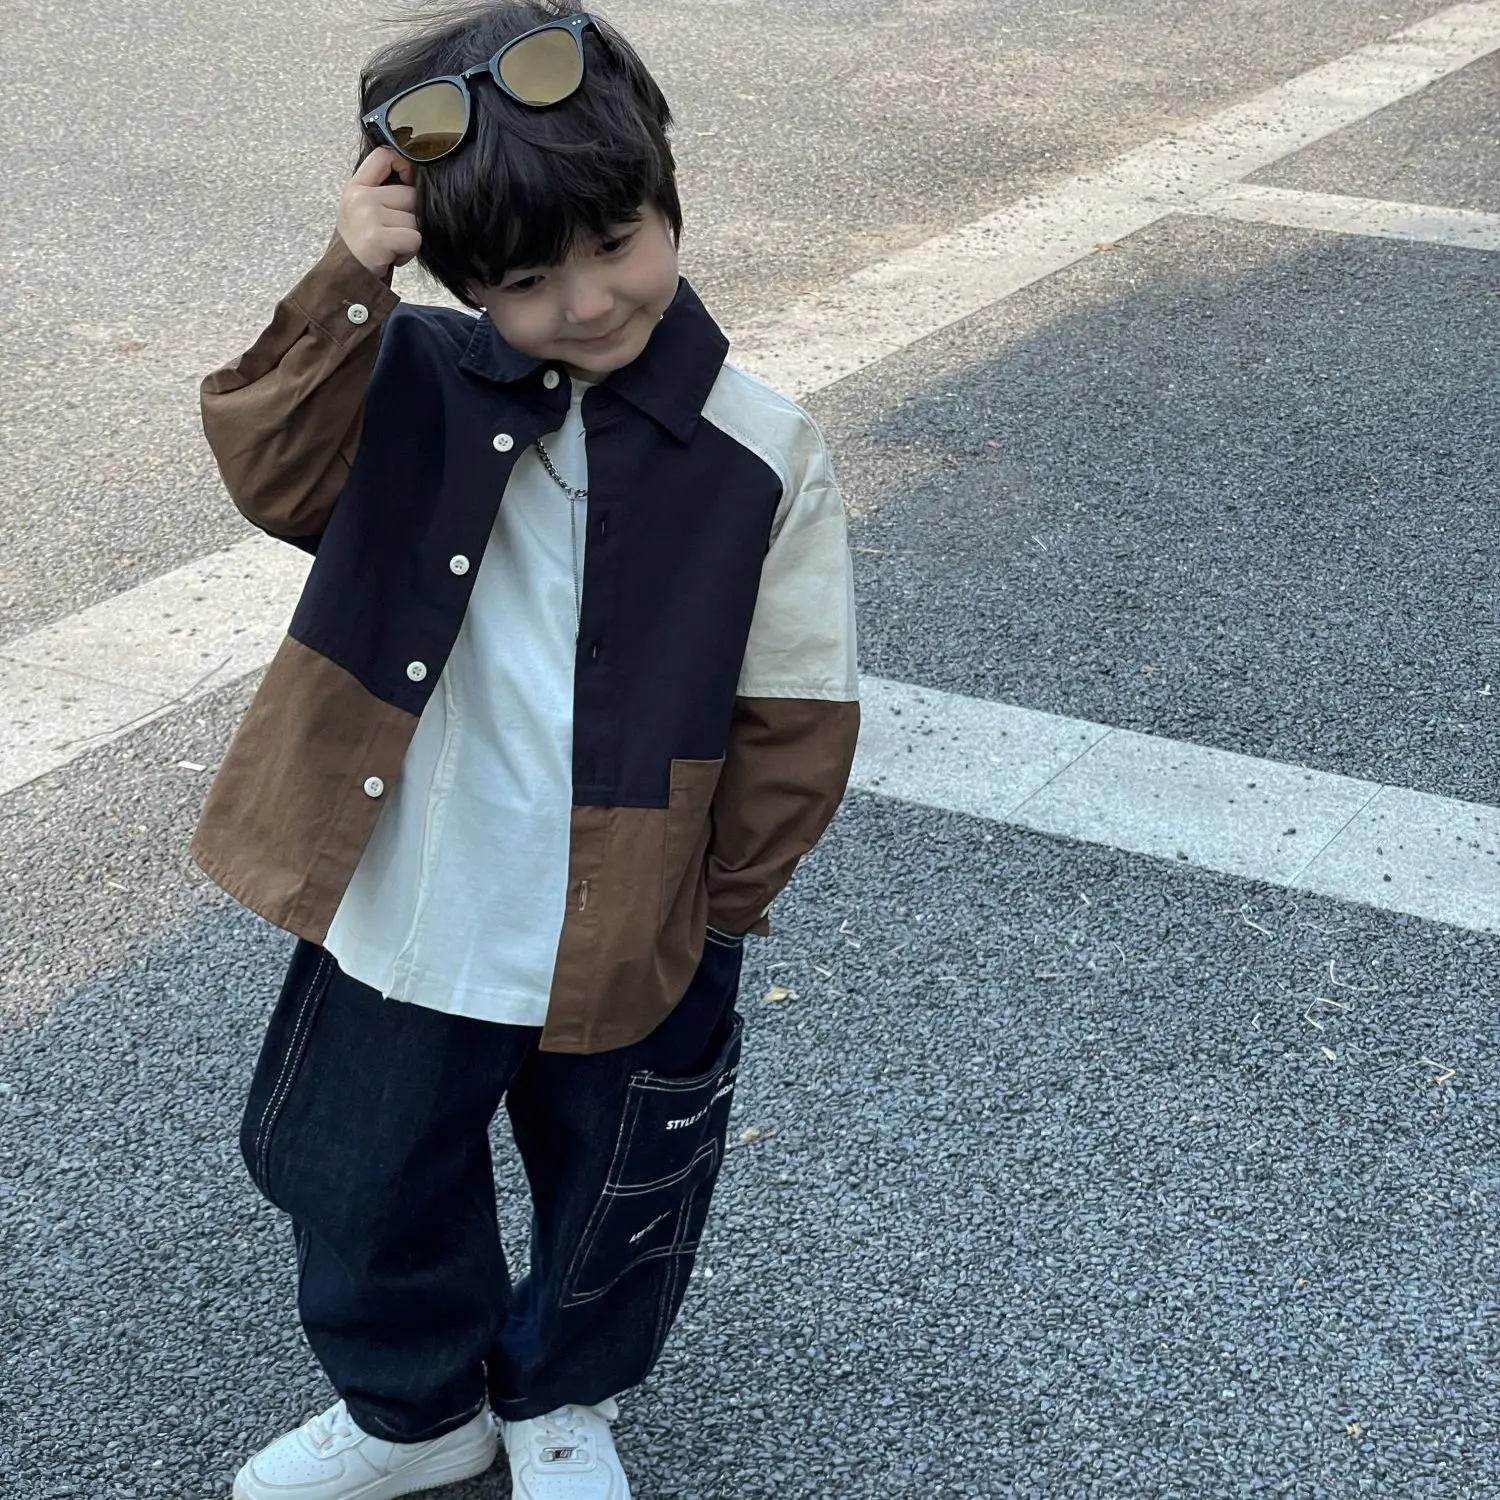 2022 New Boys' Shirt Fashion Color Contrast Children's Top Spring and Autumn Loose Casual Coat 2 to 14 Years Old Baby Clothing